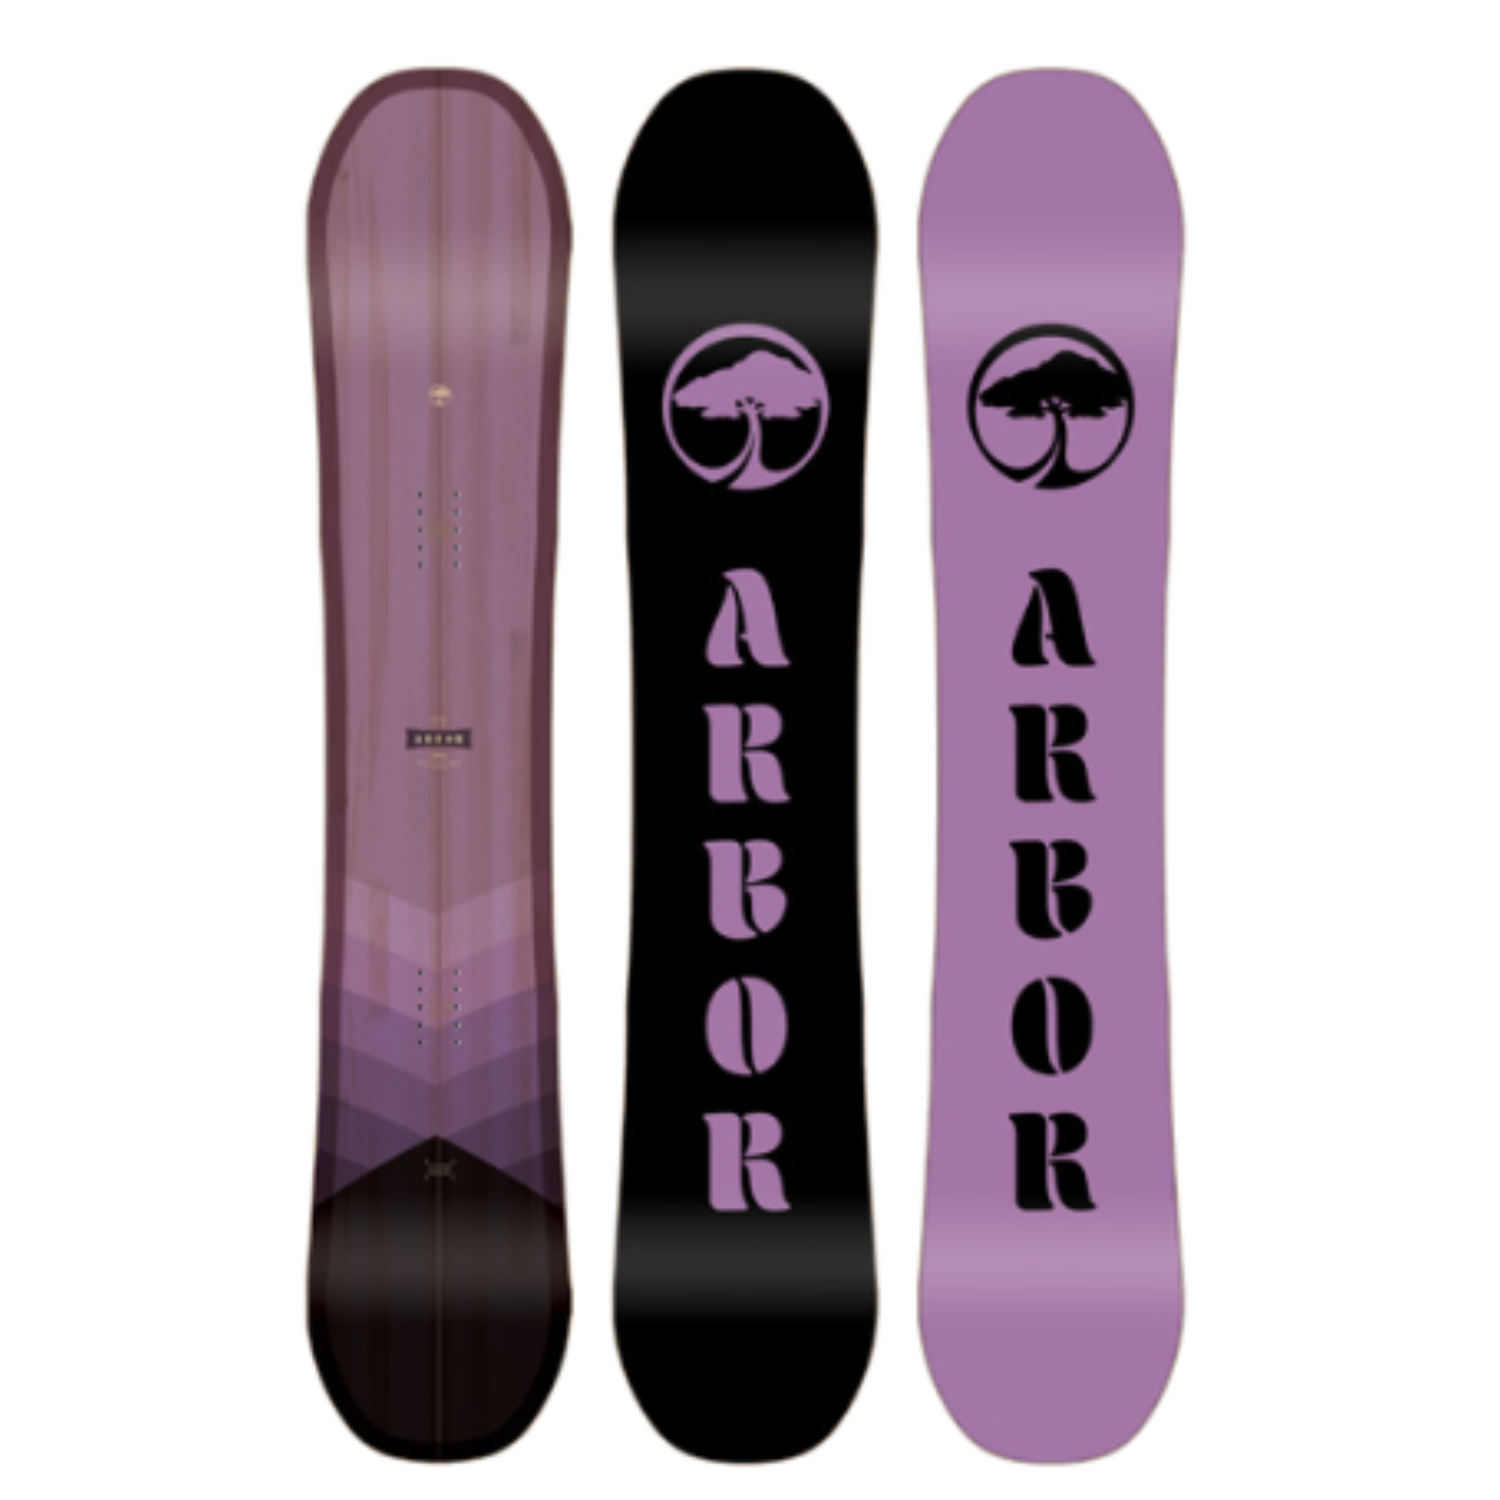 Arbor ethos resort/all-mountain snowboard in purple and black